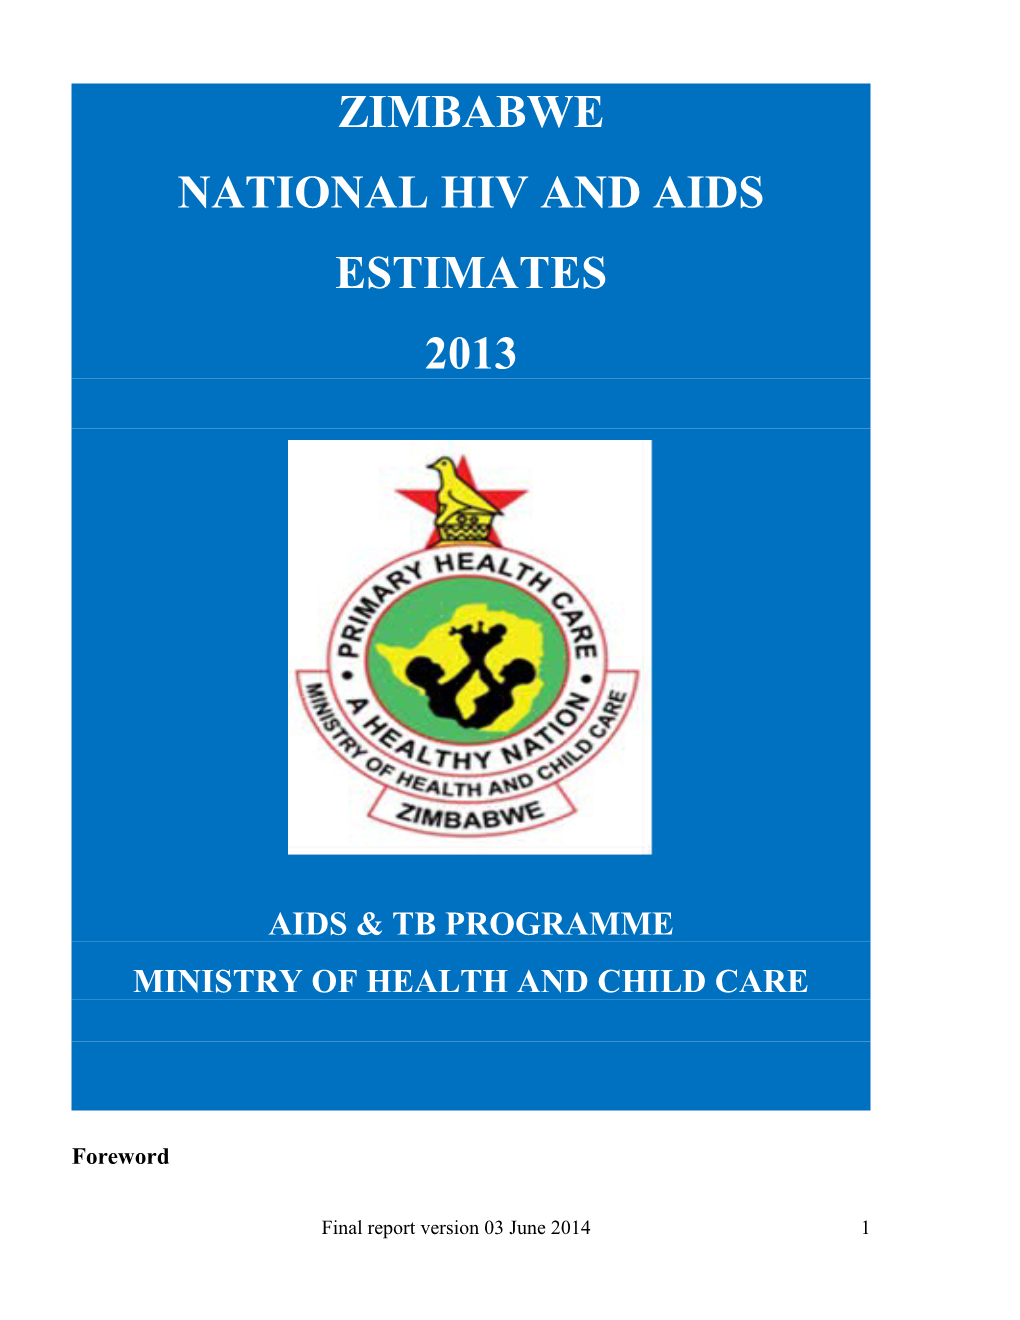 National Hiv and Aids Estimates